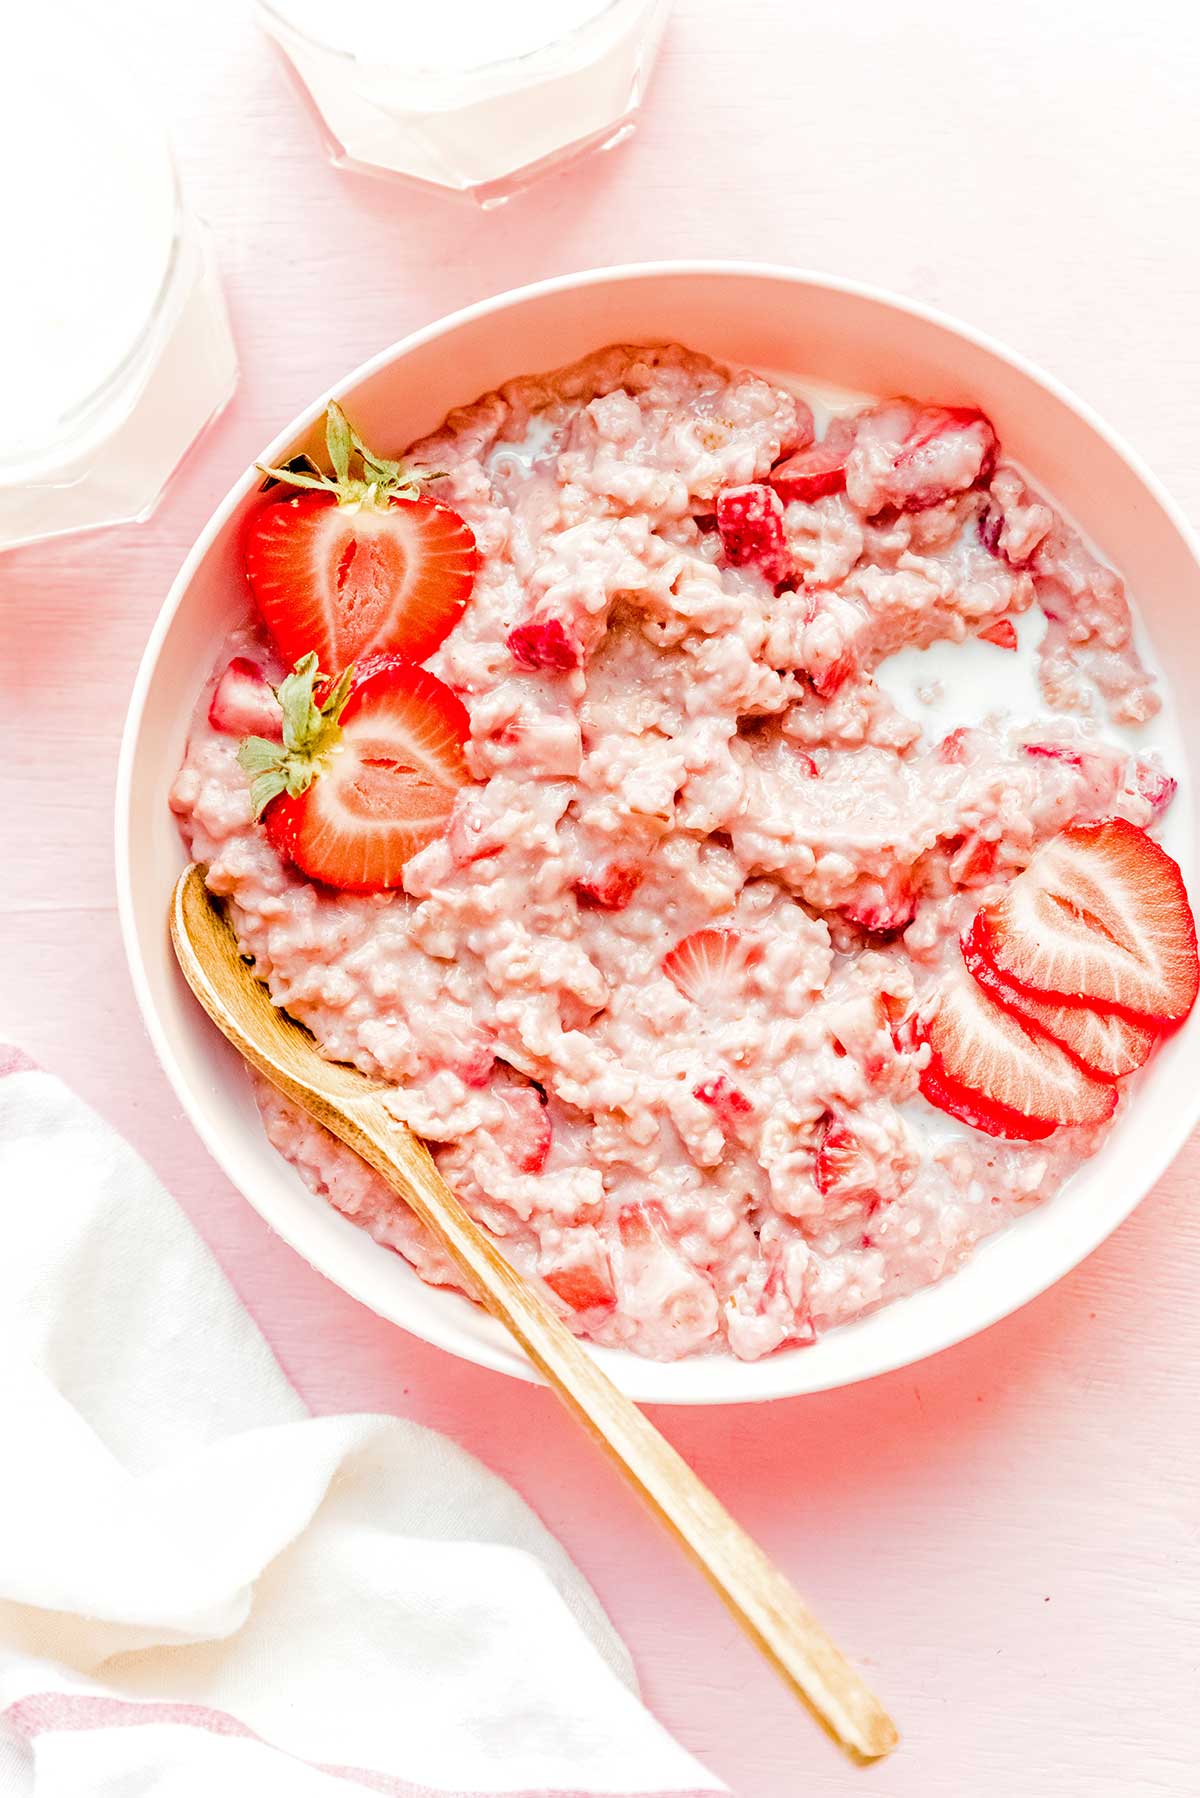 A bowl of healthy strawberry oatmeal topped with strawberry slices and halves and almond slivers